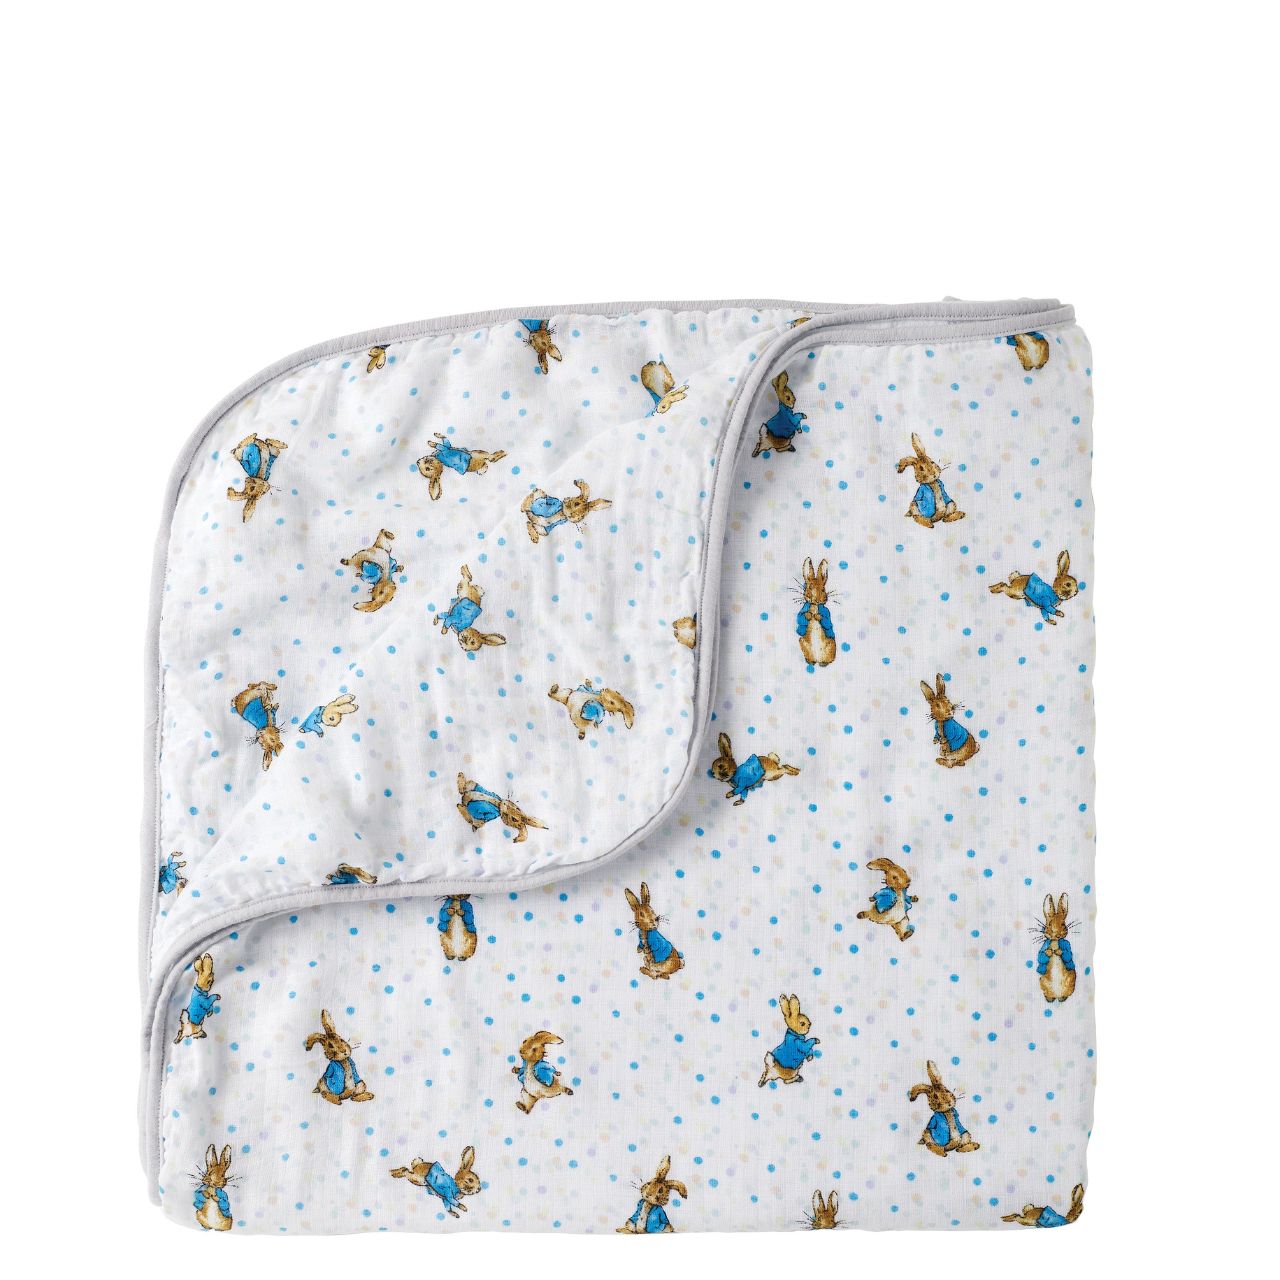 Beatrix Potter Peter Rabbit Baby Blanket  This is the dreamiest Peter Rabbit blanket you ever did see. Made from layers of luxurious 100% cotton, 105g/m2, giving your little one that extra layer of comfort and warmth in their crib. Presented on a branded gift box.